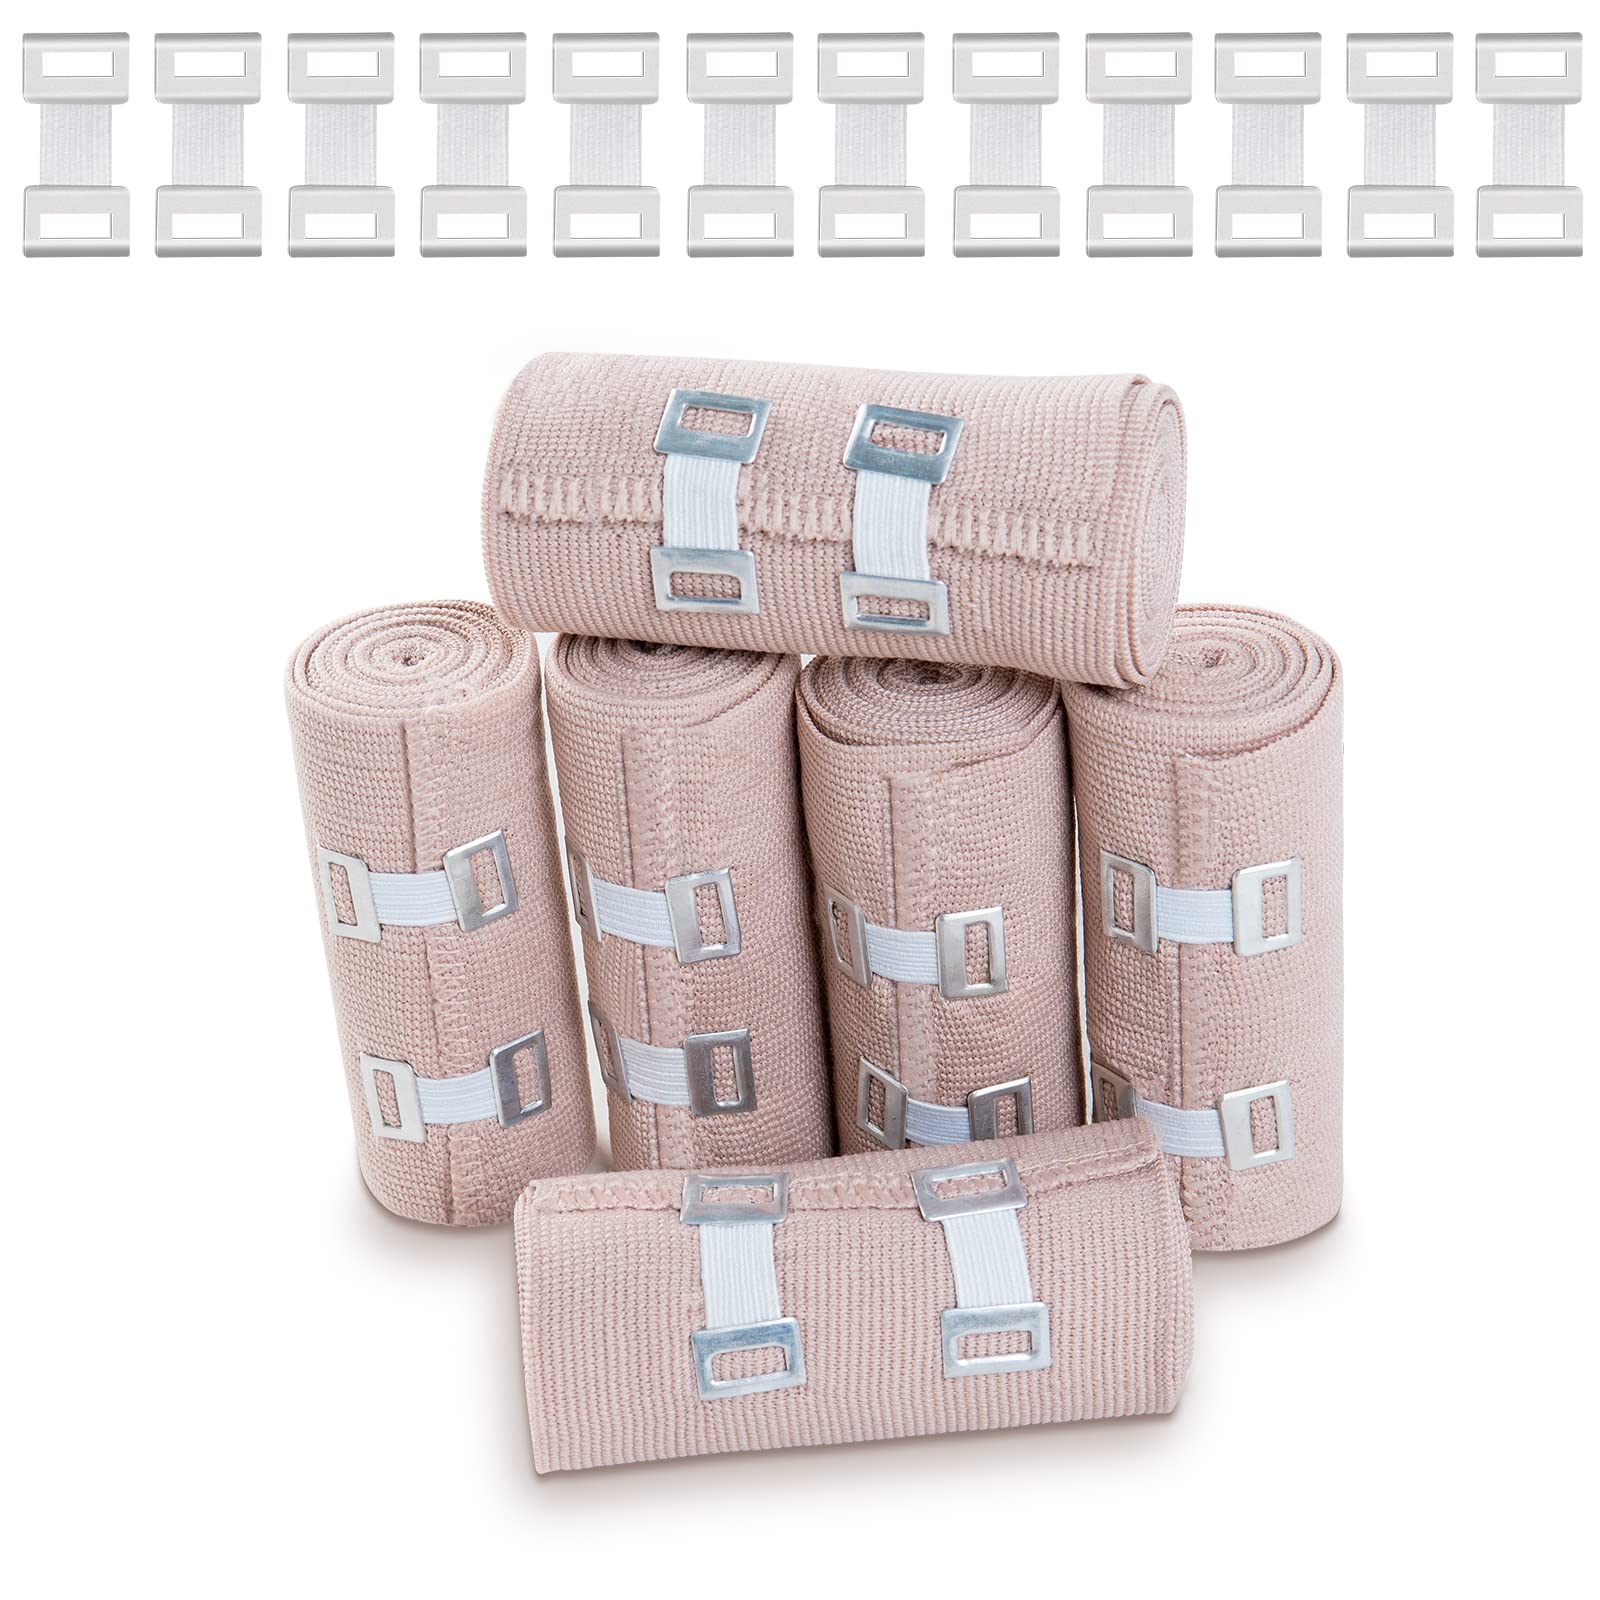 OBTANIM 6 Rolls Elastic Bandage Wrap with 12 Extra Clips, 6 Inch X 15ft  Compression Bandage Stretch Tape for Medical, Athletic Sport, Wrist, Arm,  Leg Sprains, Calf, Ankle & Foot